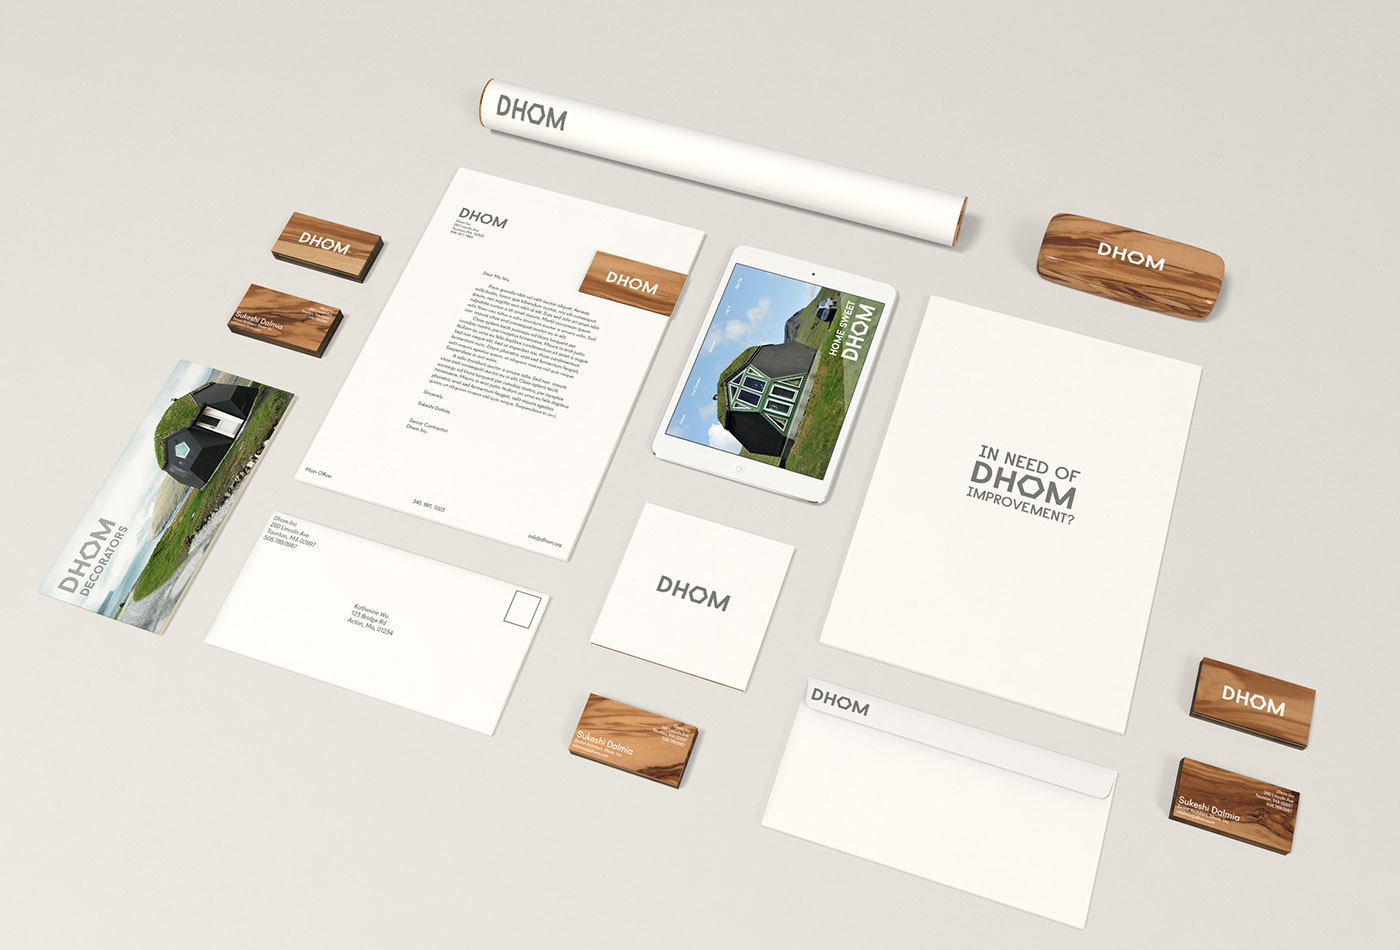 domes Geodesic dome homes faroe islands Identity Design campaign environment living wooden business cards